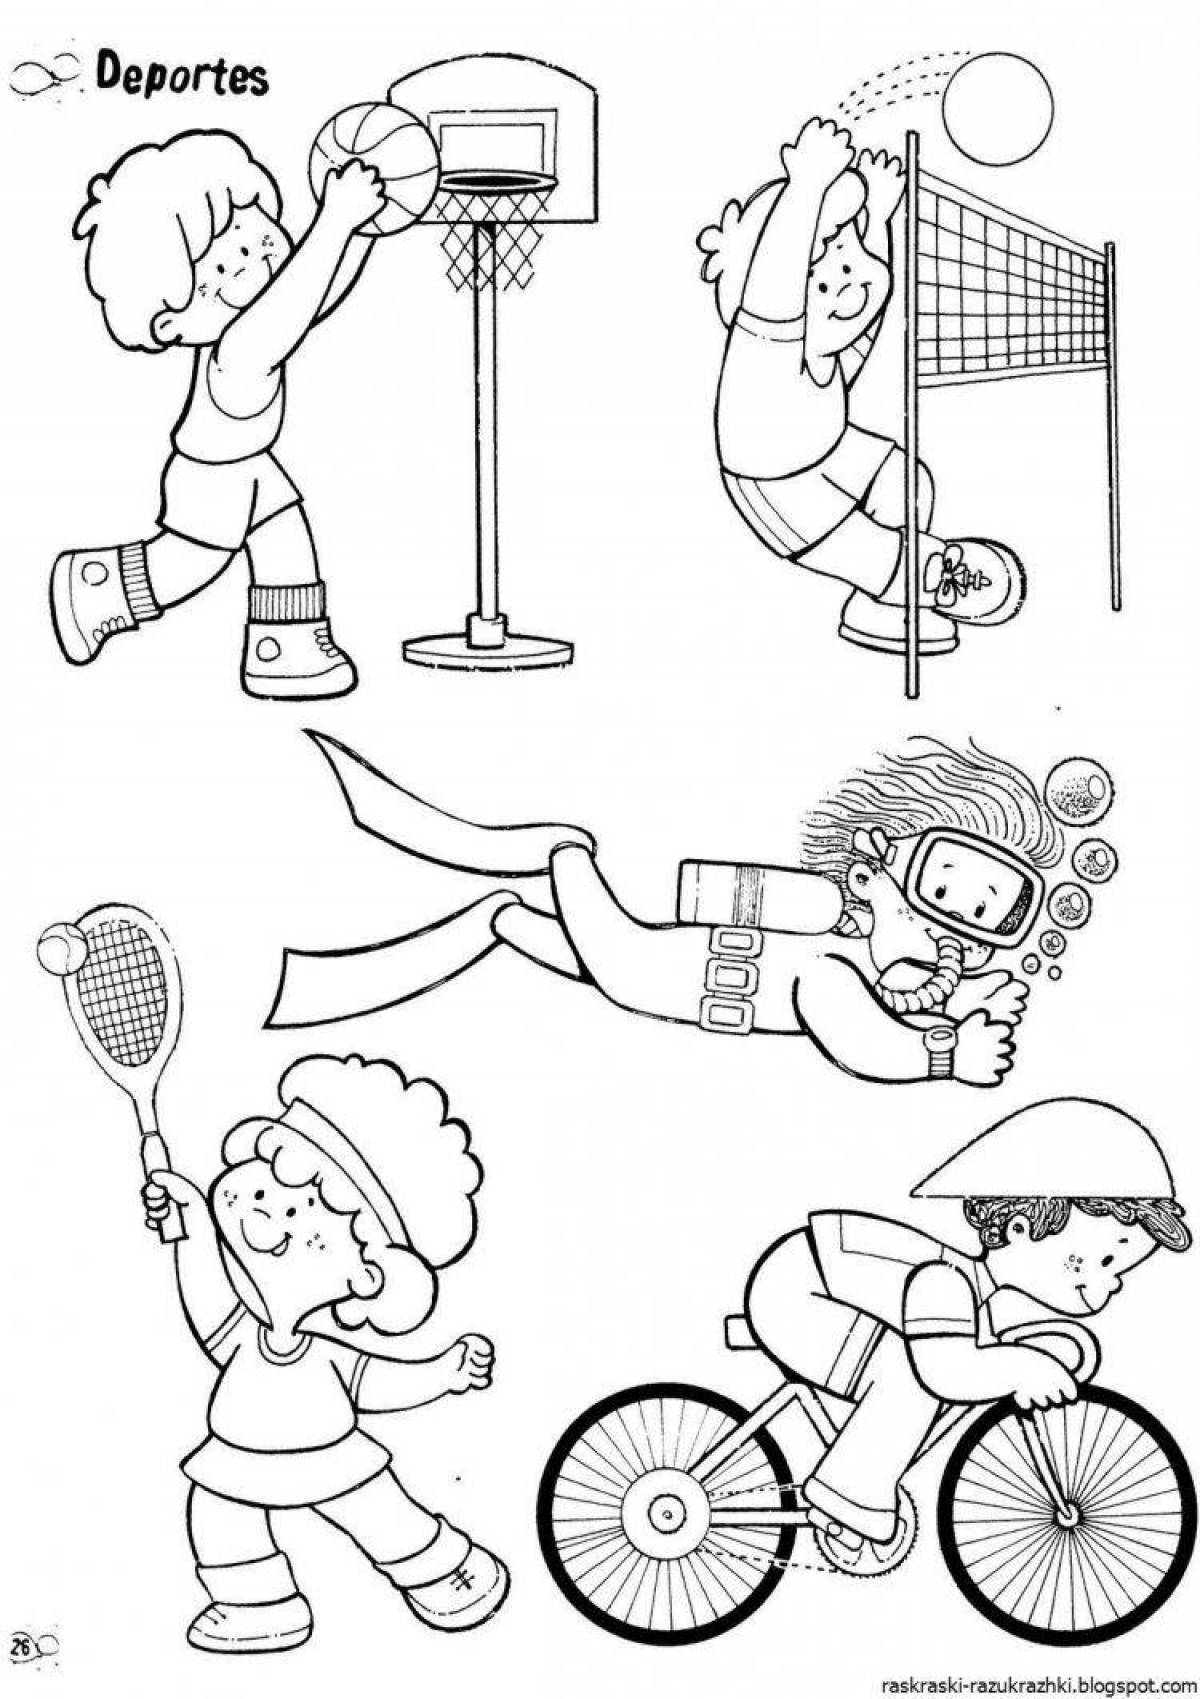 Fun coloring page project playtime